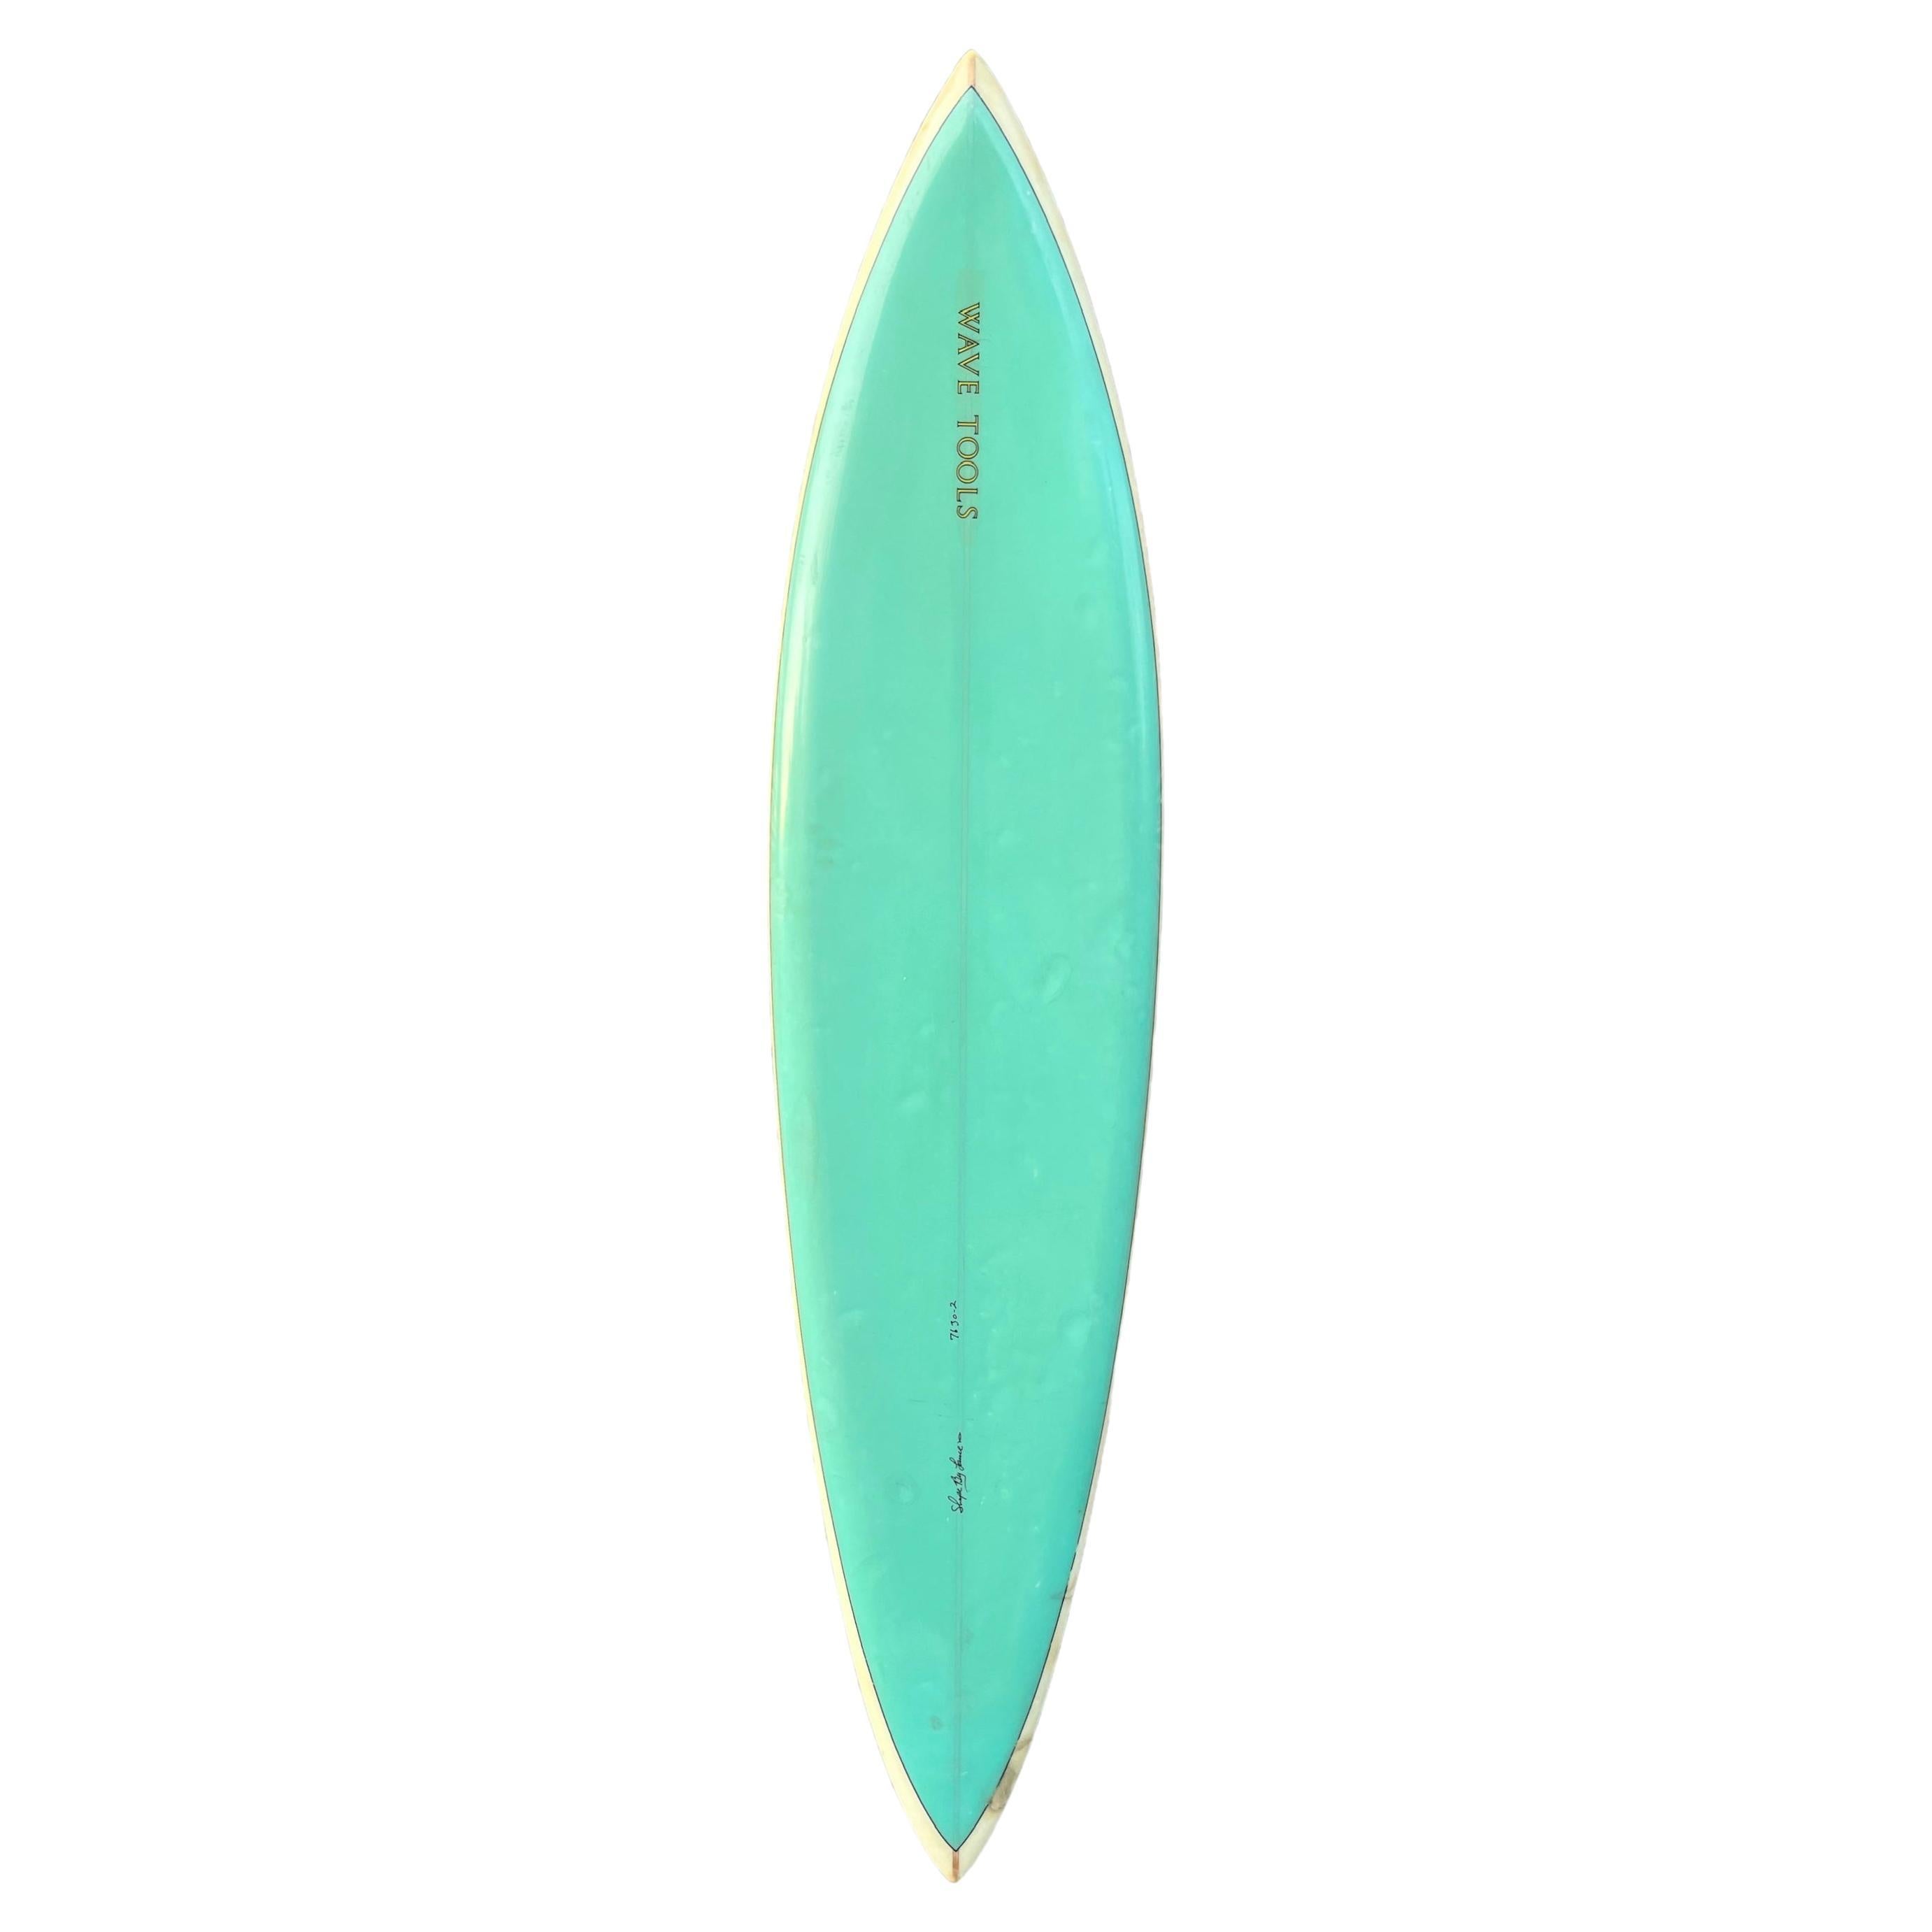 1970s Vintage Wave Tools Surfboard by Lance Collins